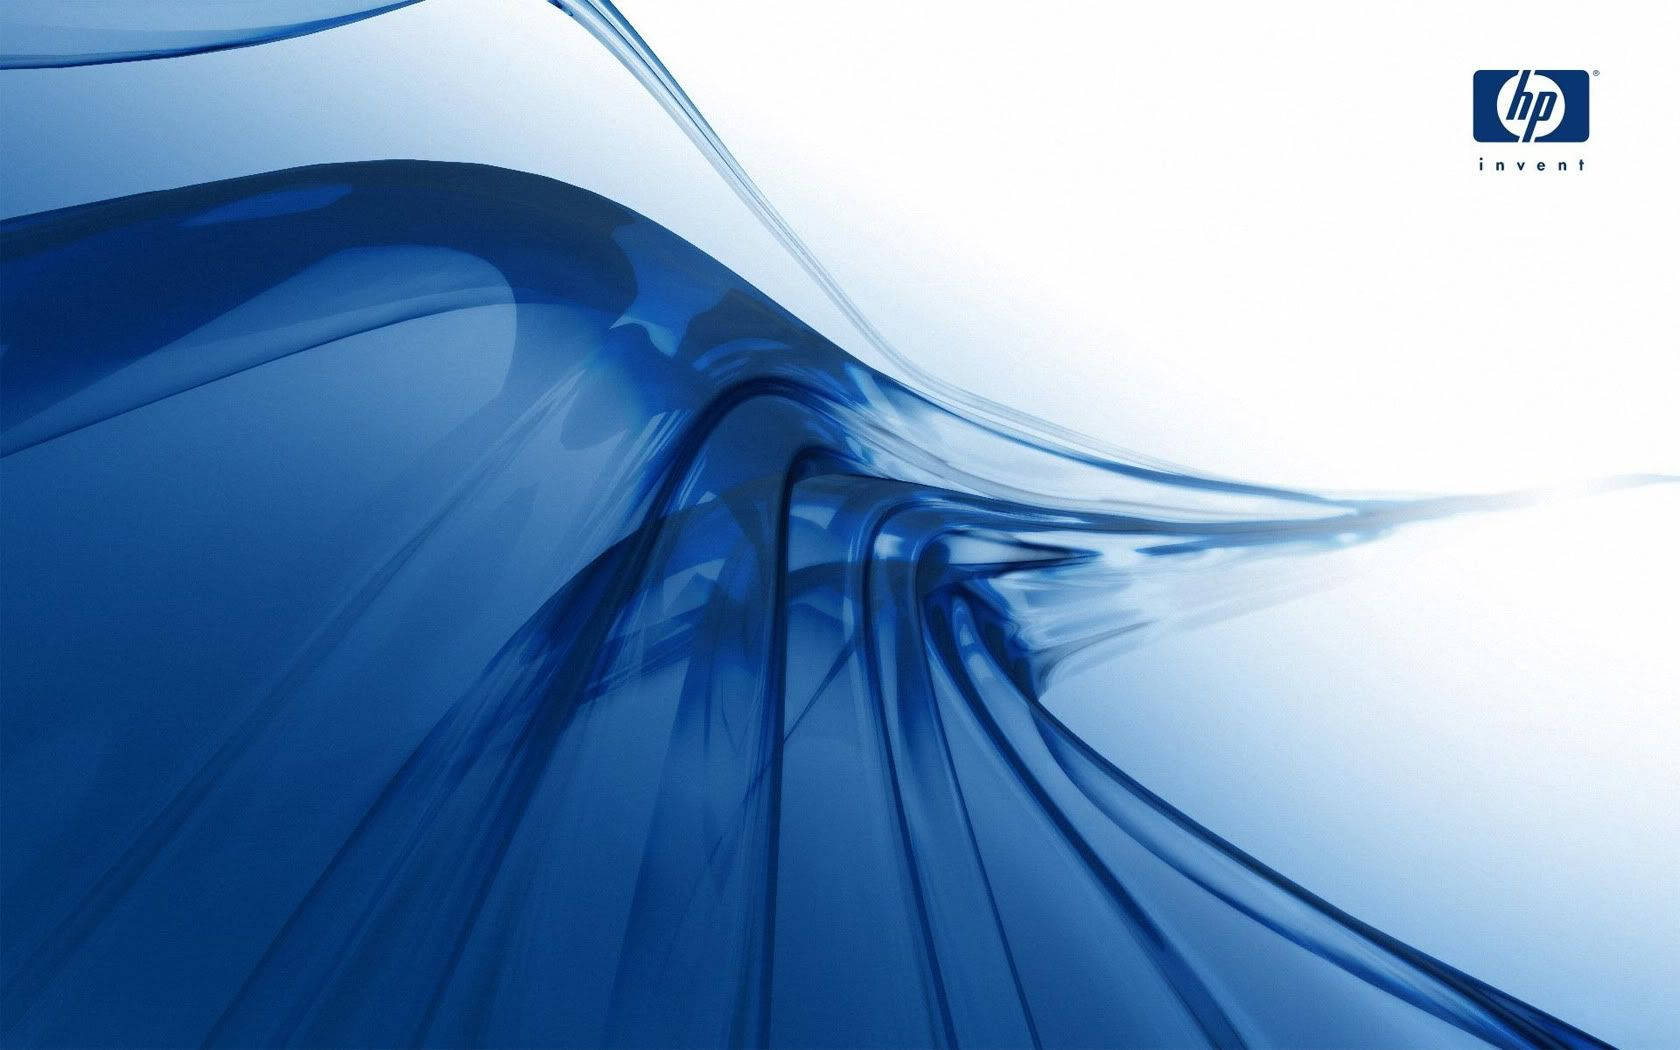 Blue Glass-like Waves Hp Invent